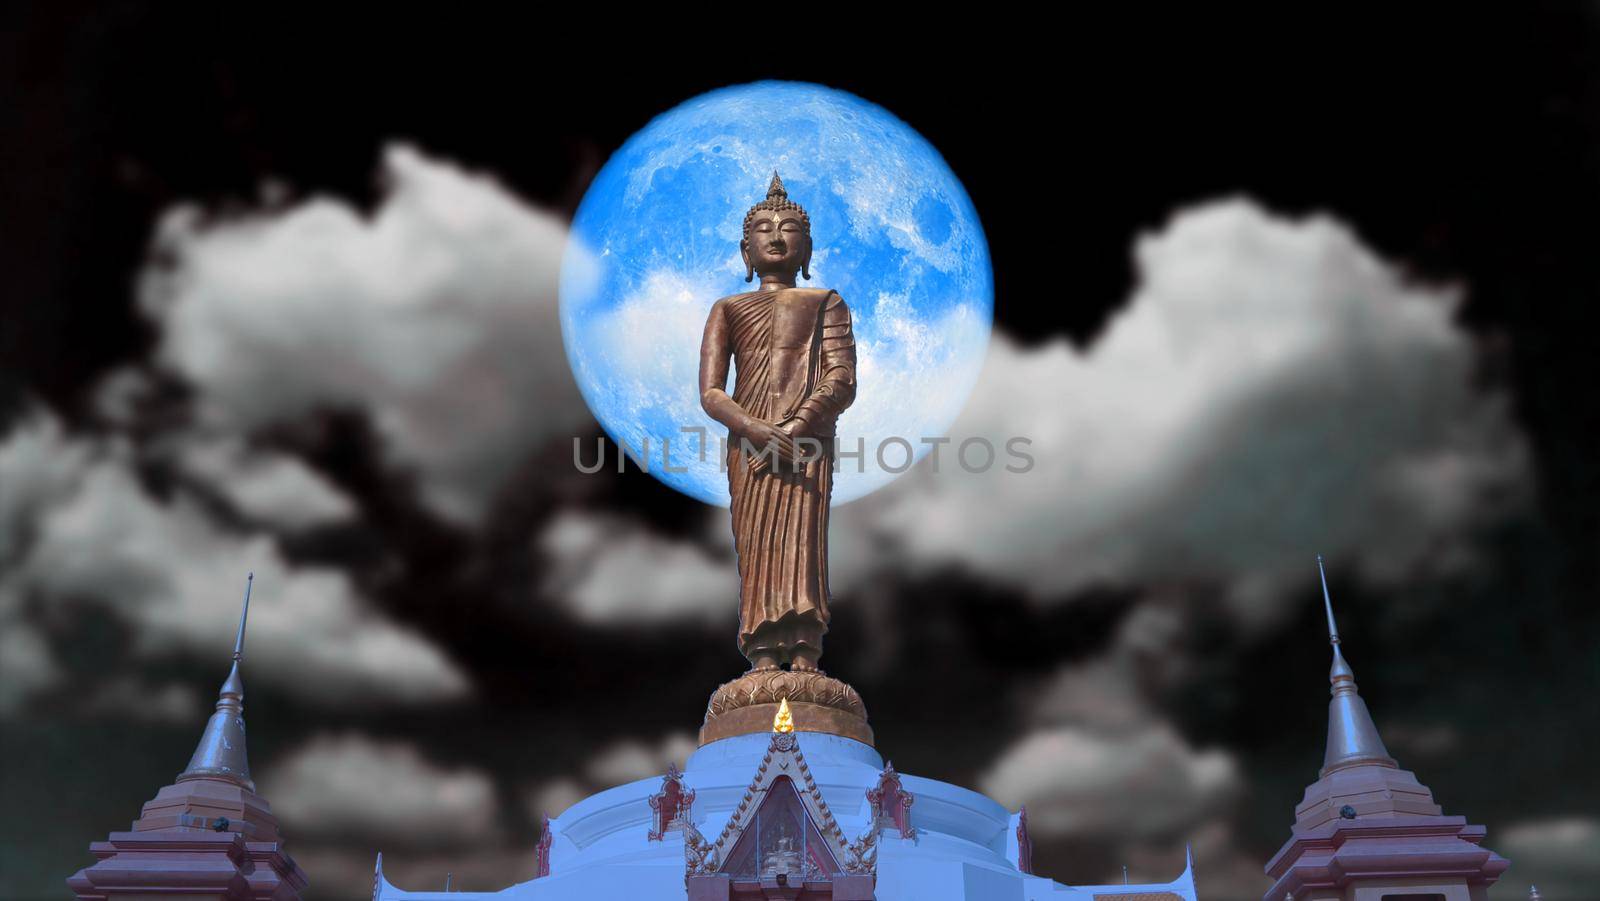 full blue moon and Buddha looking seven day style on the night sky by Darkfox